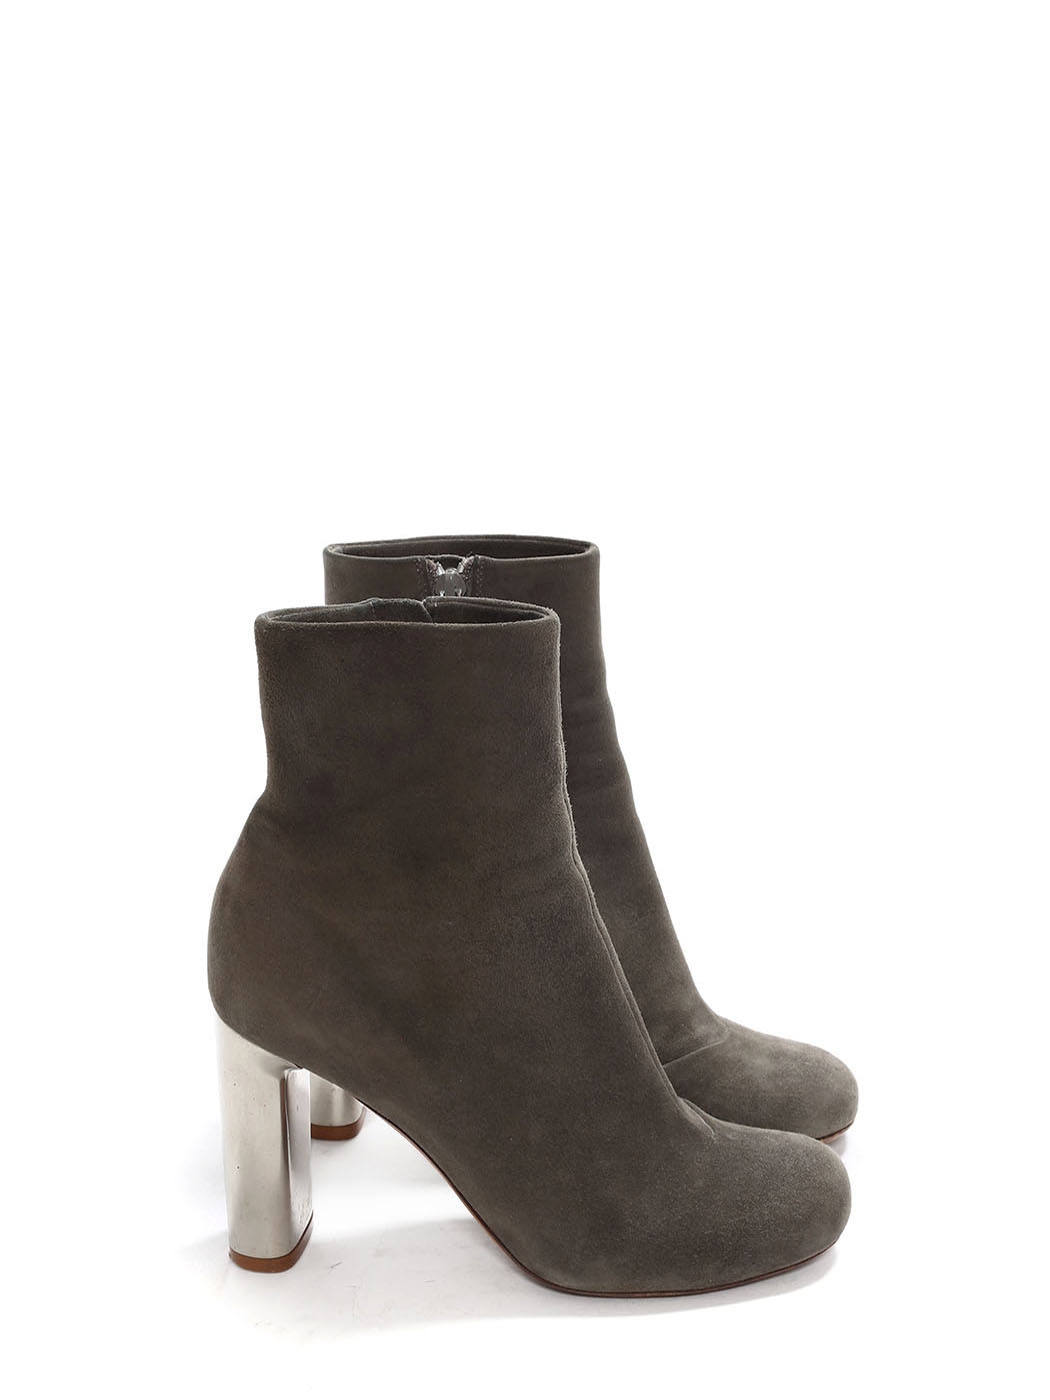 CELINE BAM BAM grey suede leather ankle 